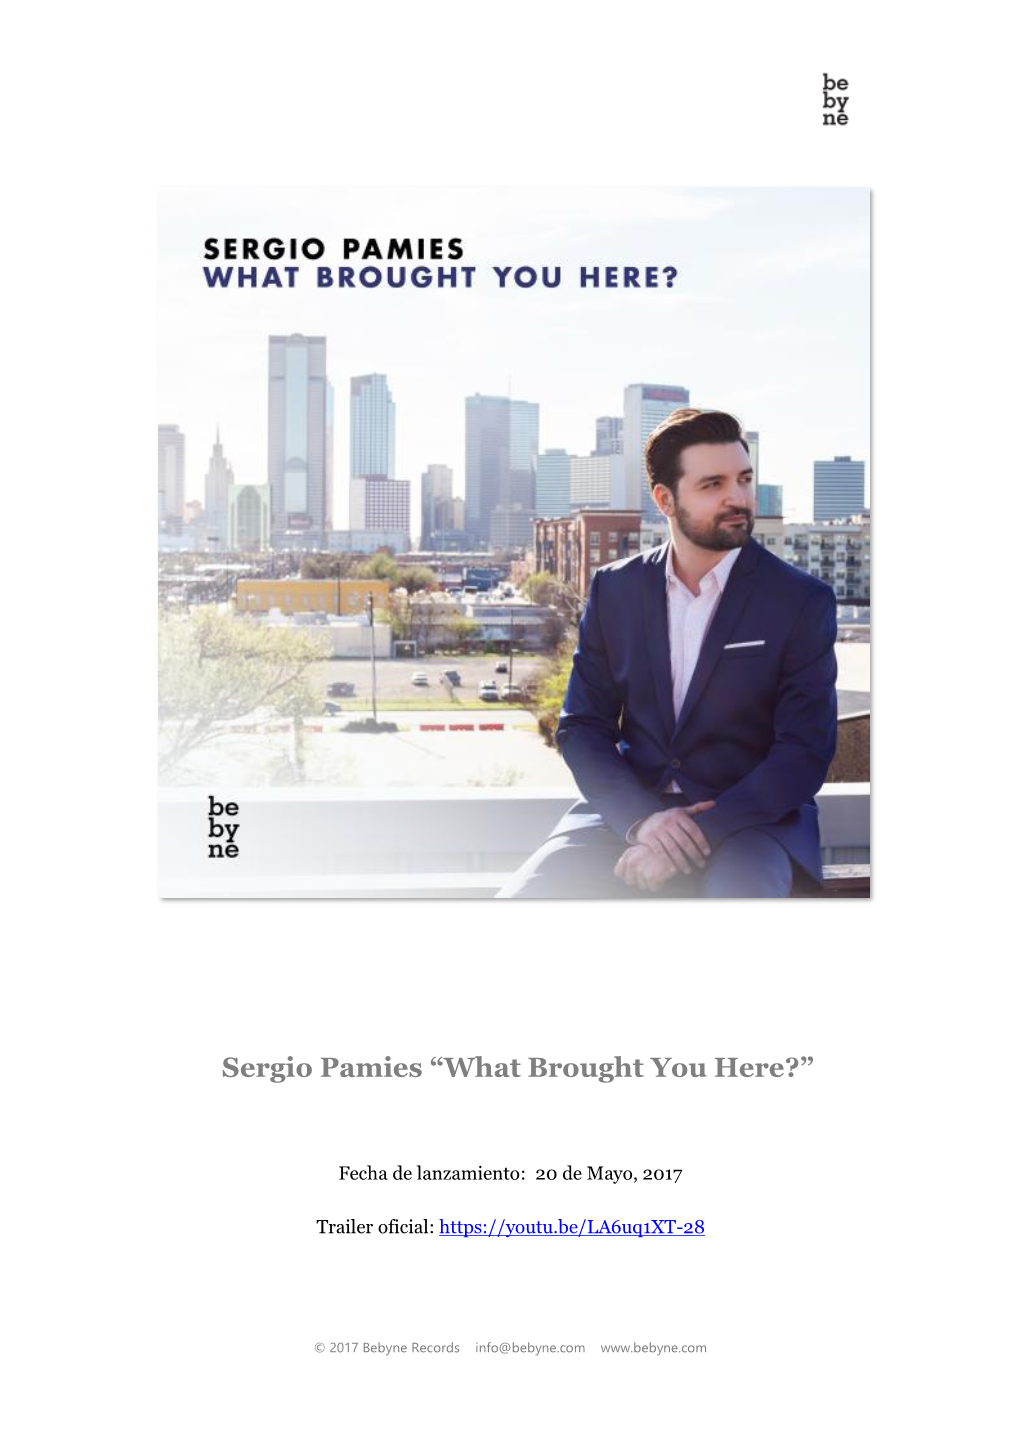 Sergio Pamies “What Brought You Here?”